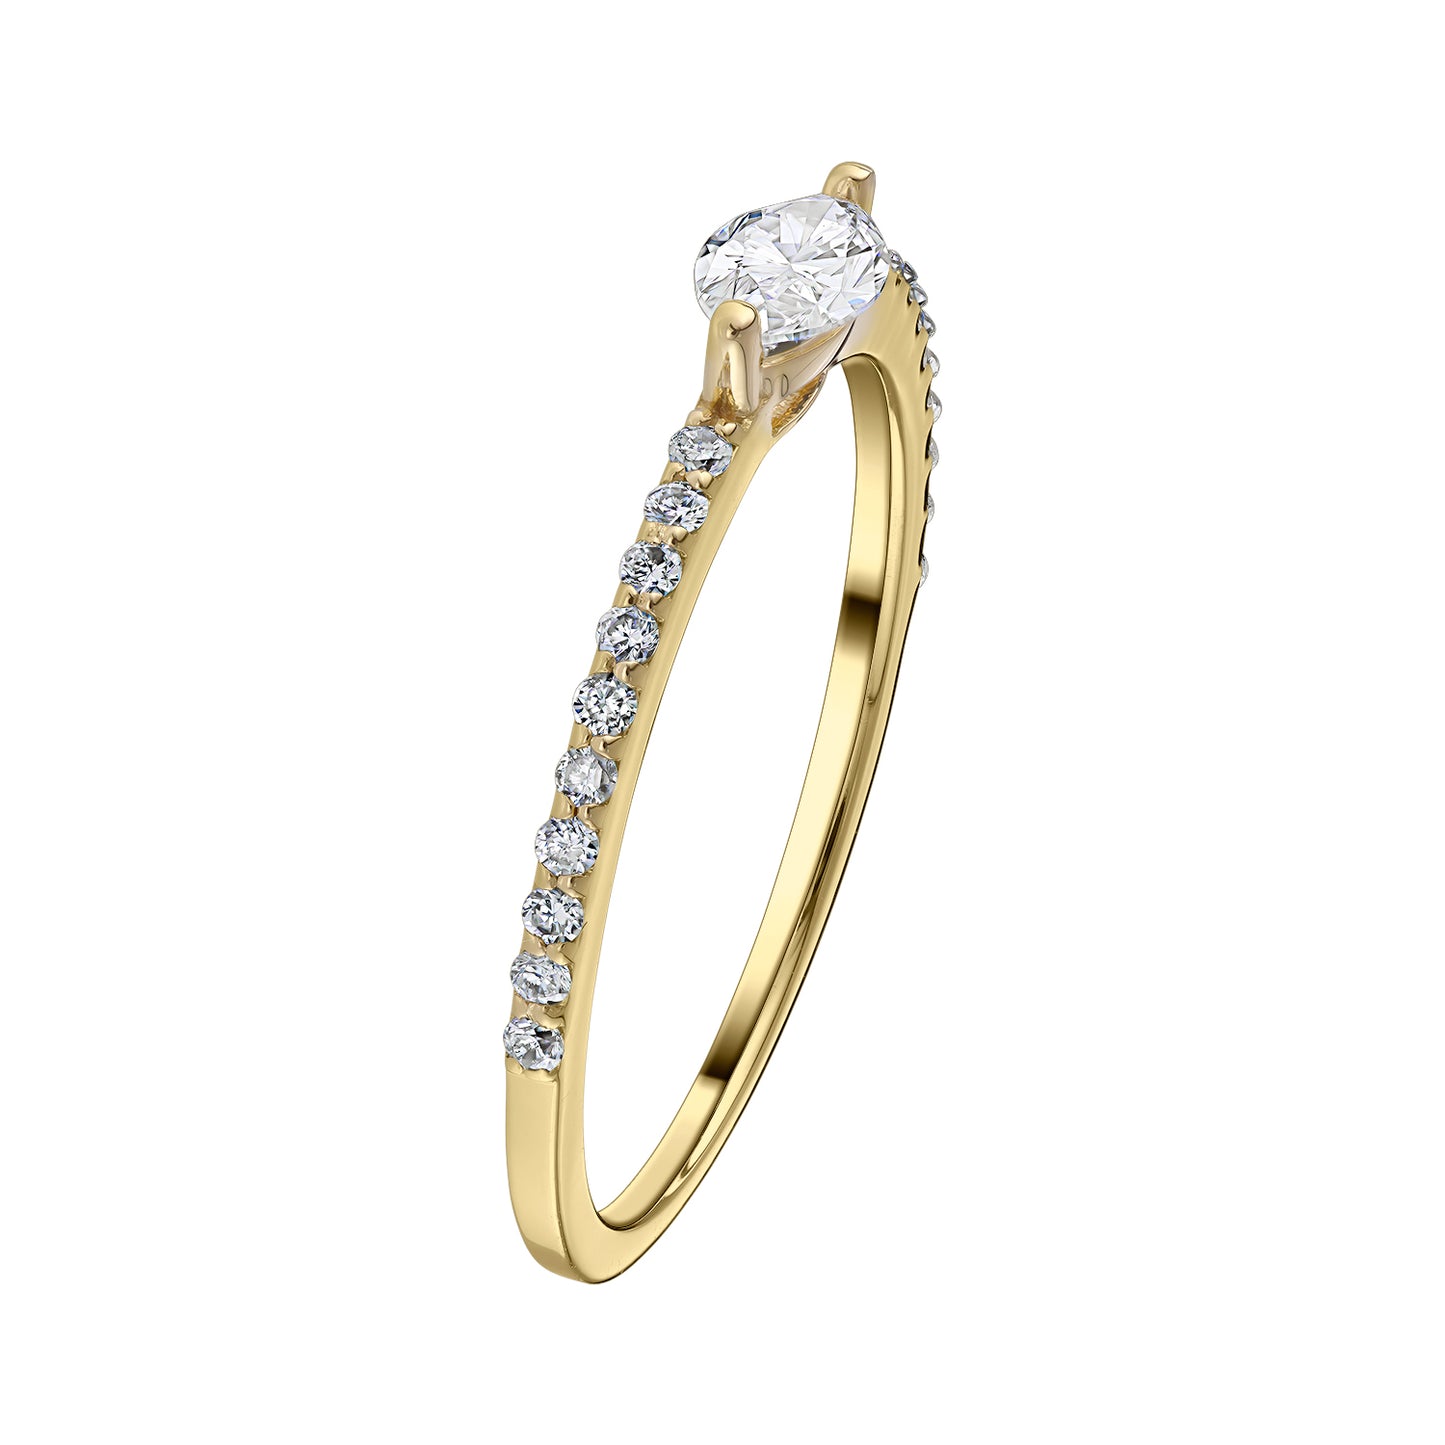 Gold Ring 14K (585) Mirage with Diamonds 0.35 ct - Gold